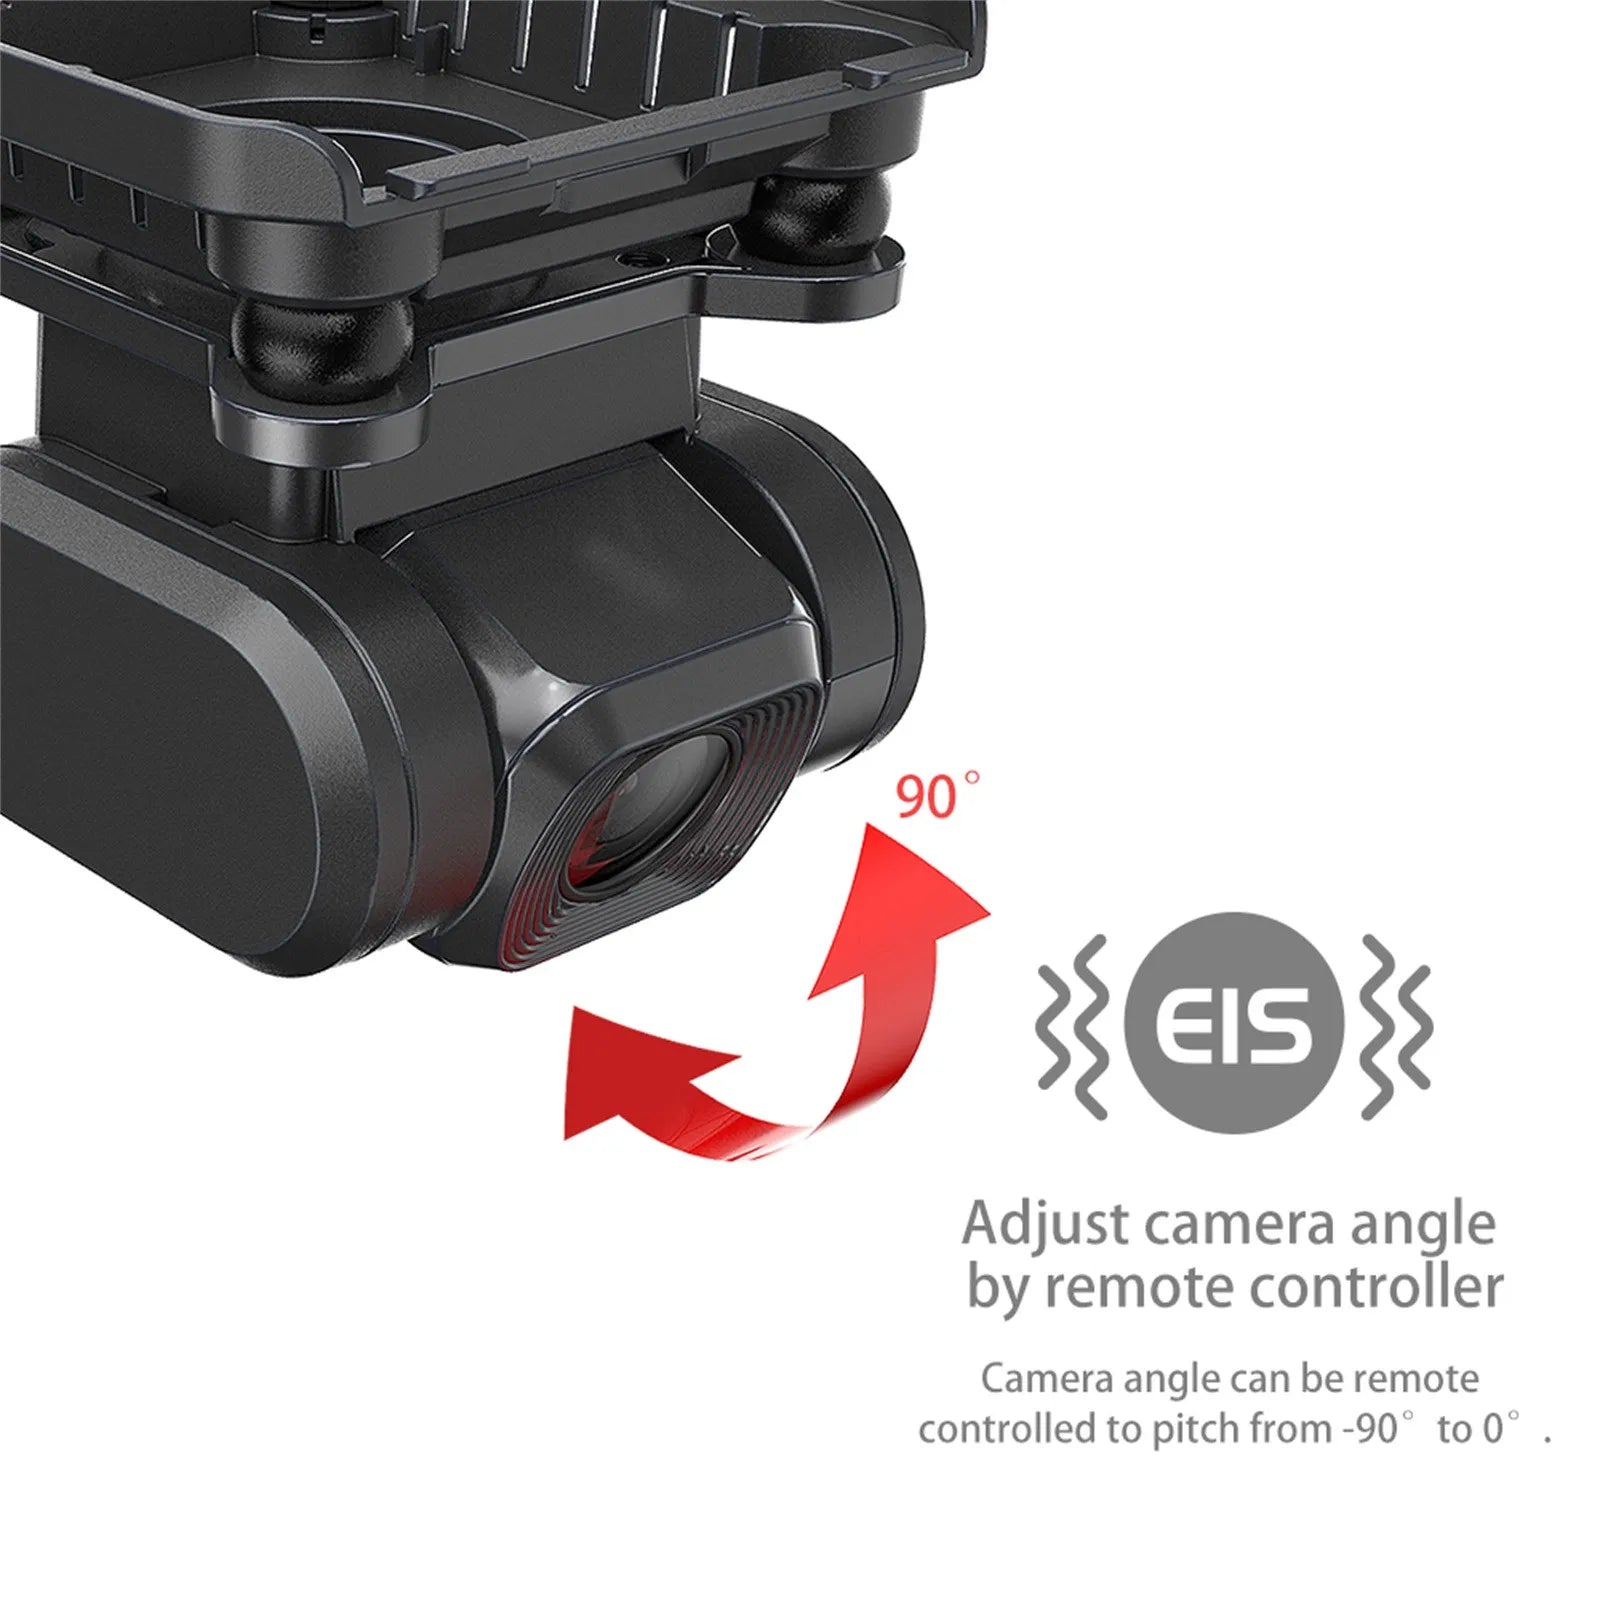 Mjx Bugs 20 Drone, camera angle can be remote controlled to pitch from -90 to 0 eis 